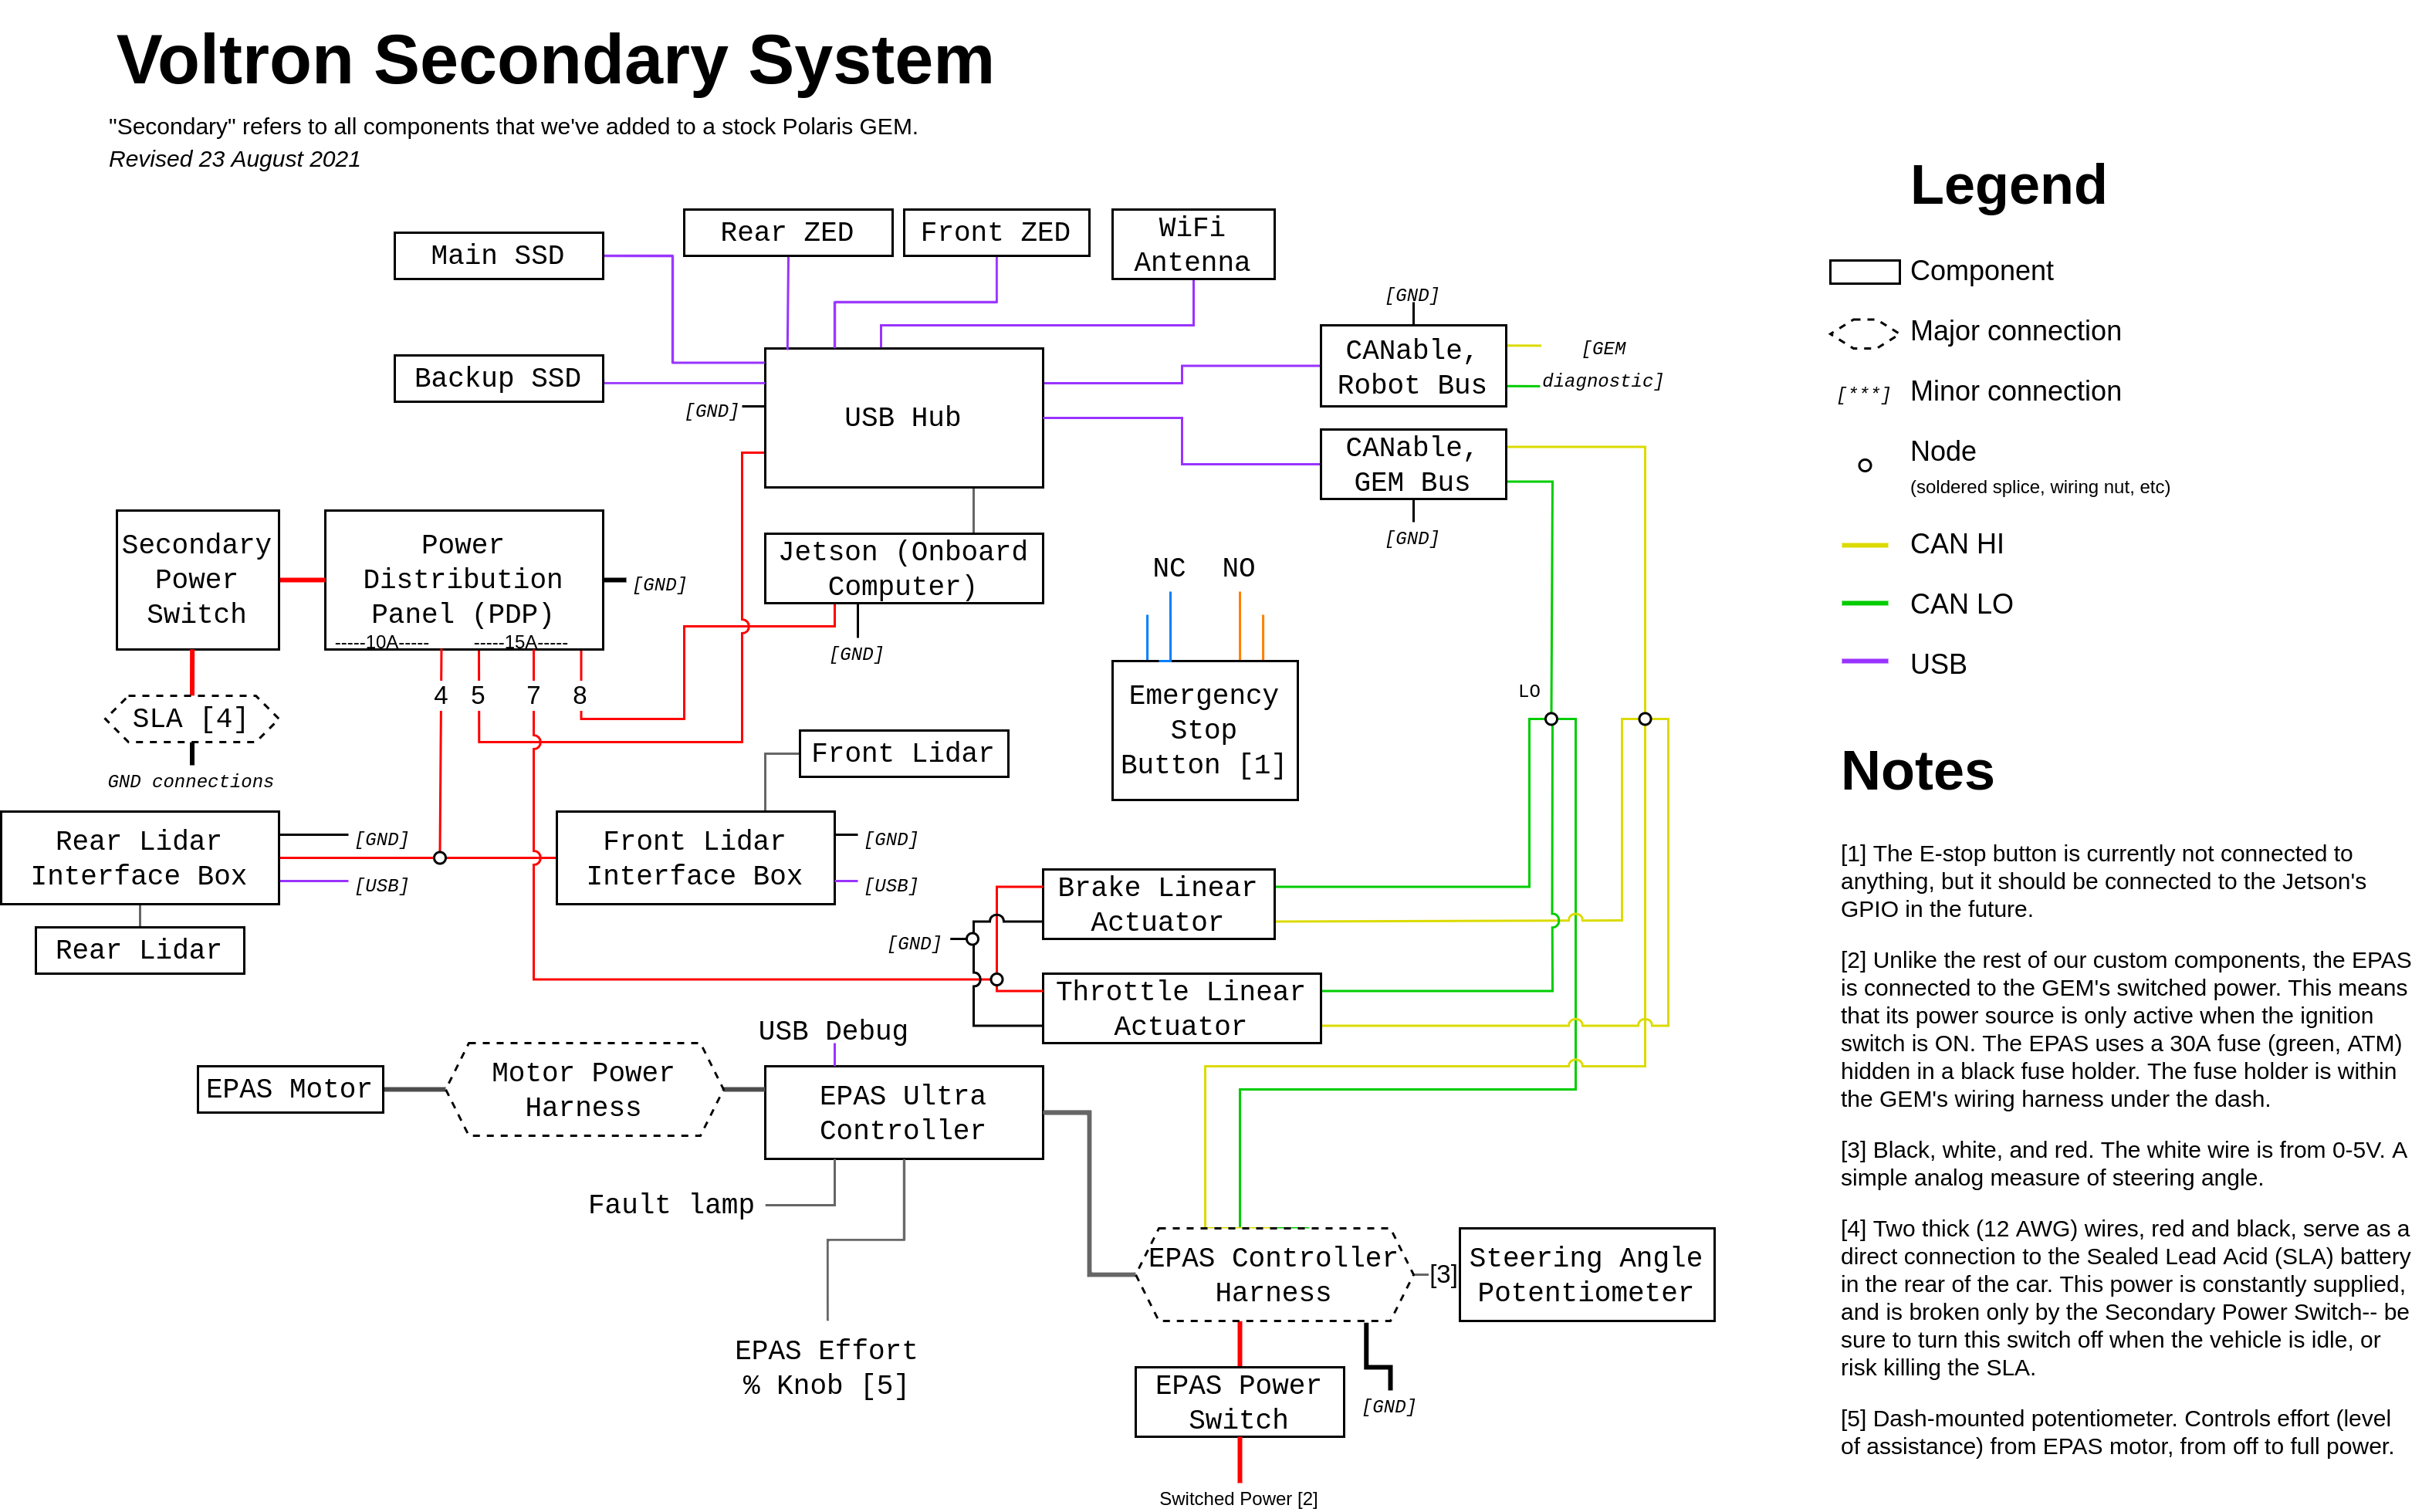 Voltron Secondary System schematic